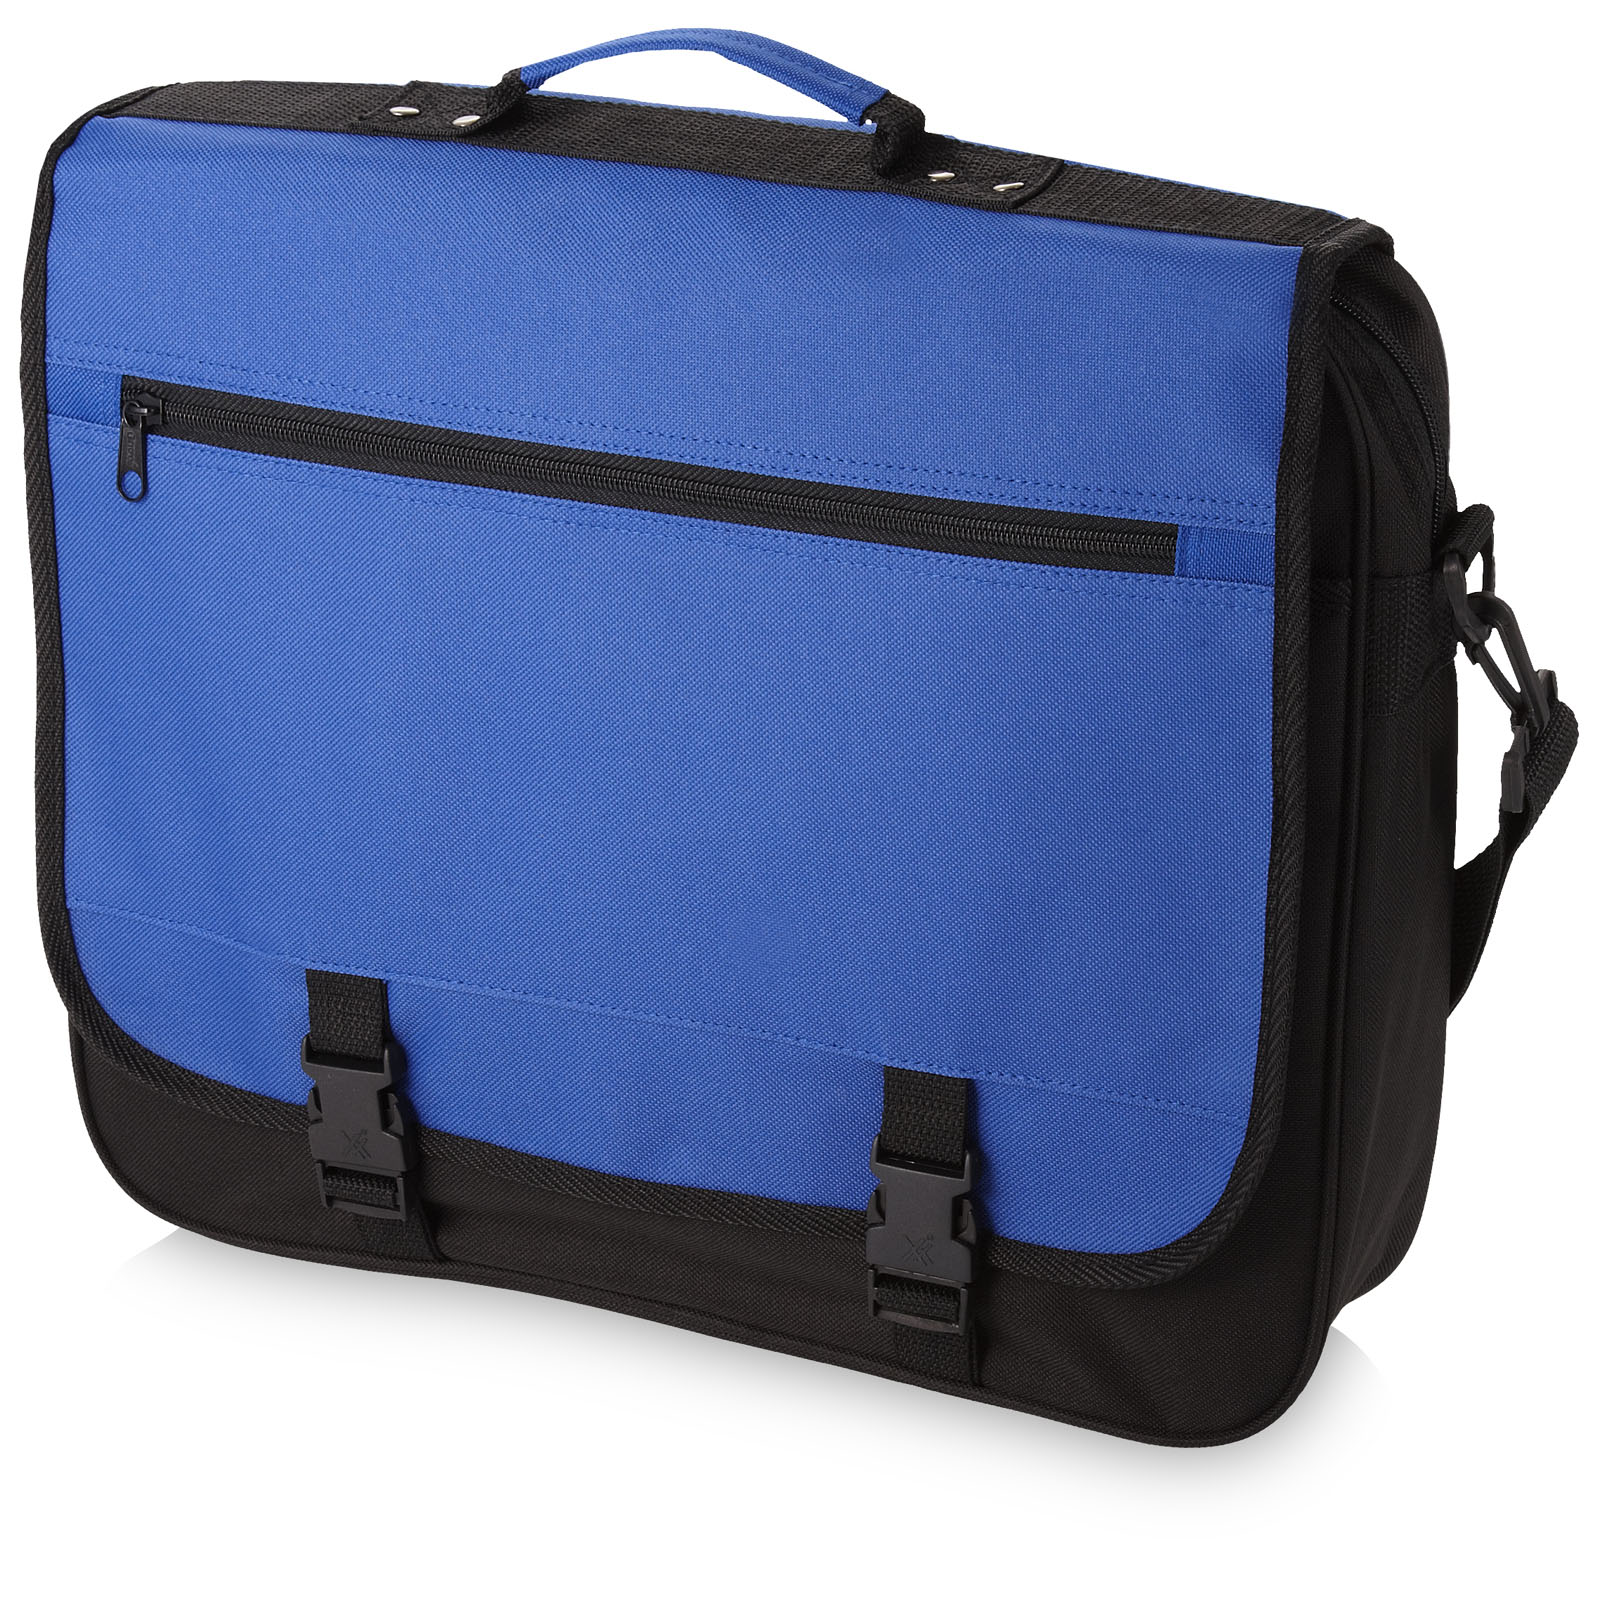 Advertising Conference bags - Anchorage conference bag 11L